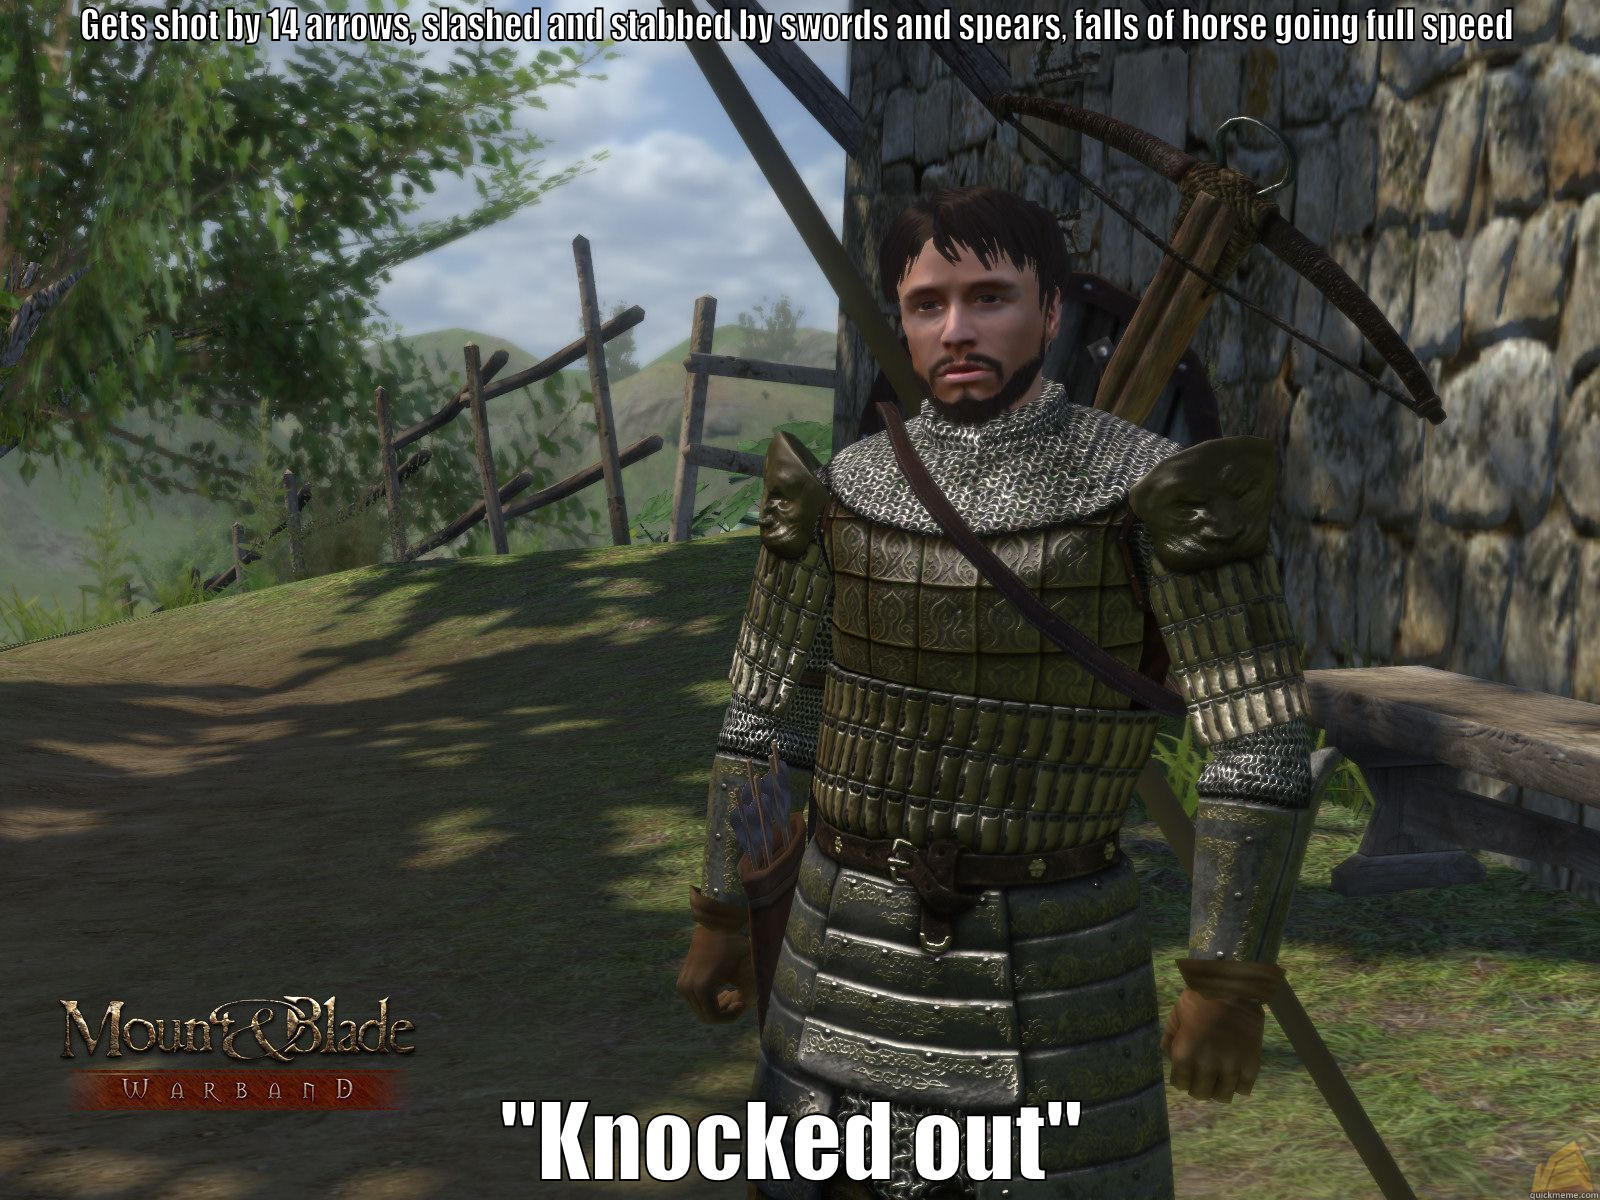 Mount and Blade Logic - GETS SHOT BY 14 ARROWS, SLASHED AND STABBED BY SWORDS AND SPEARS, FALLS OF HORSE GOING FULL SPEED 